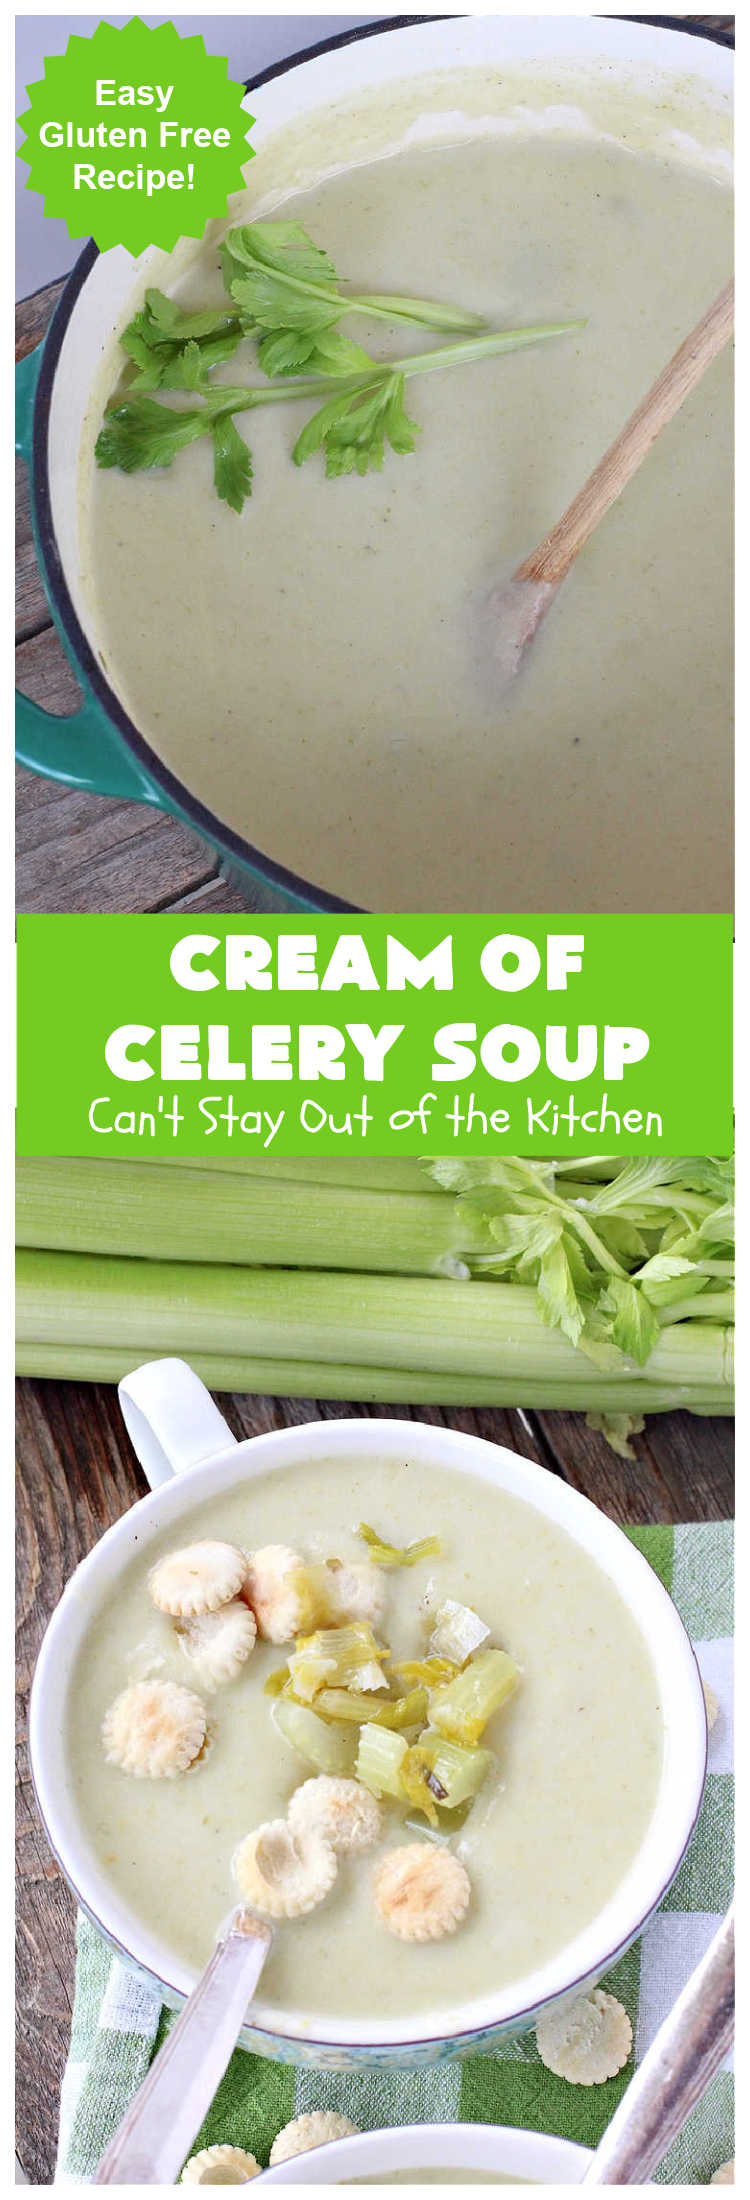 Cream of Celery Soup | Can't Stay Out of the Kitchen